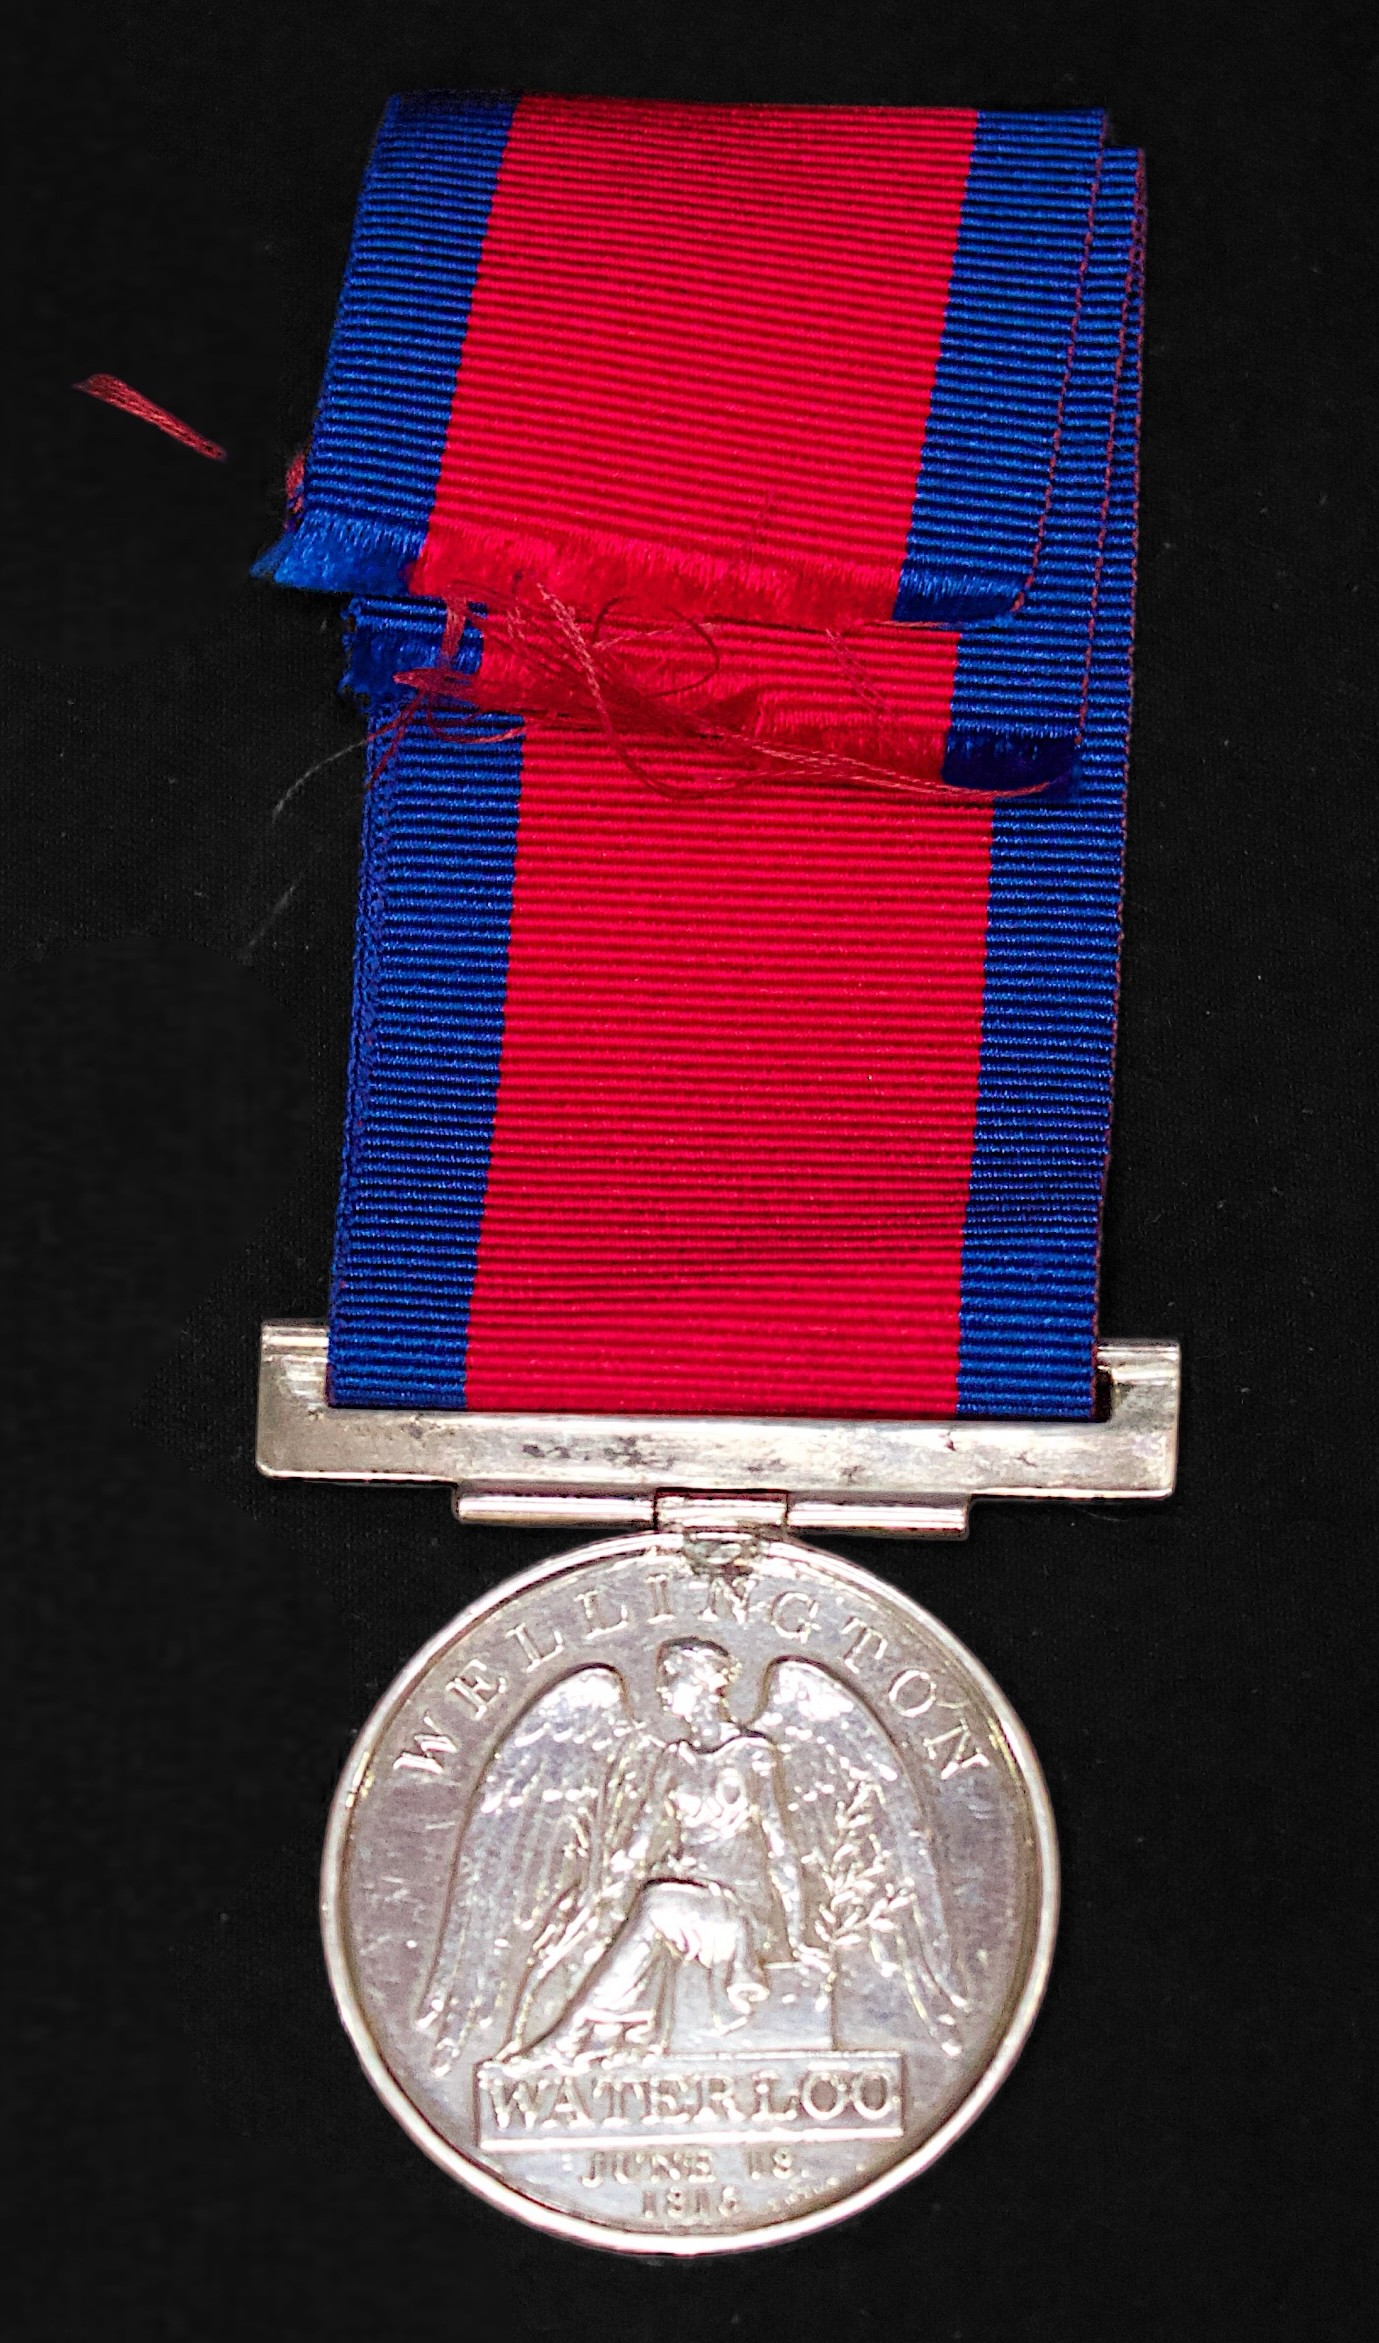 A Waterloo Medal 1815 to William Aberfield 2nd Battalion 95th Regiment of Foot, together with A3 - Image 2 of 6